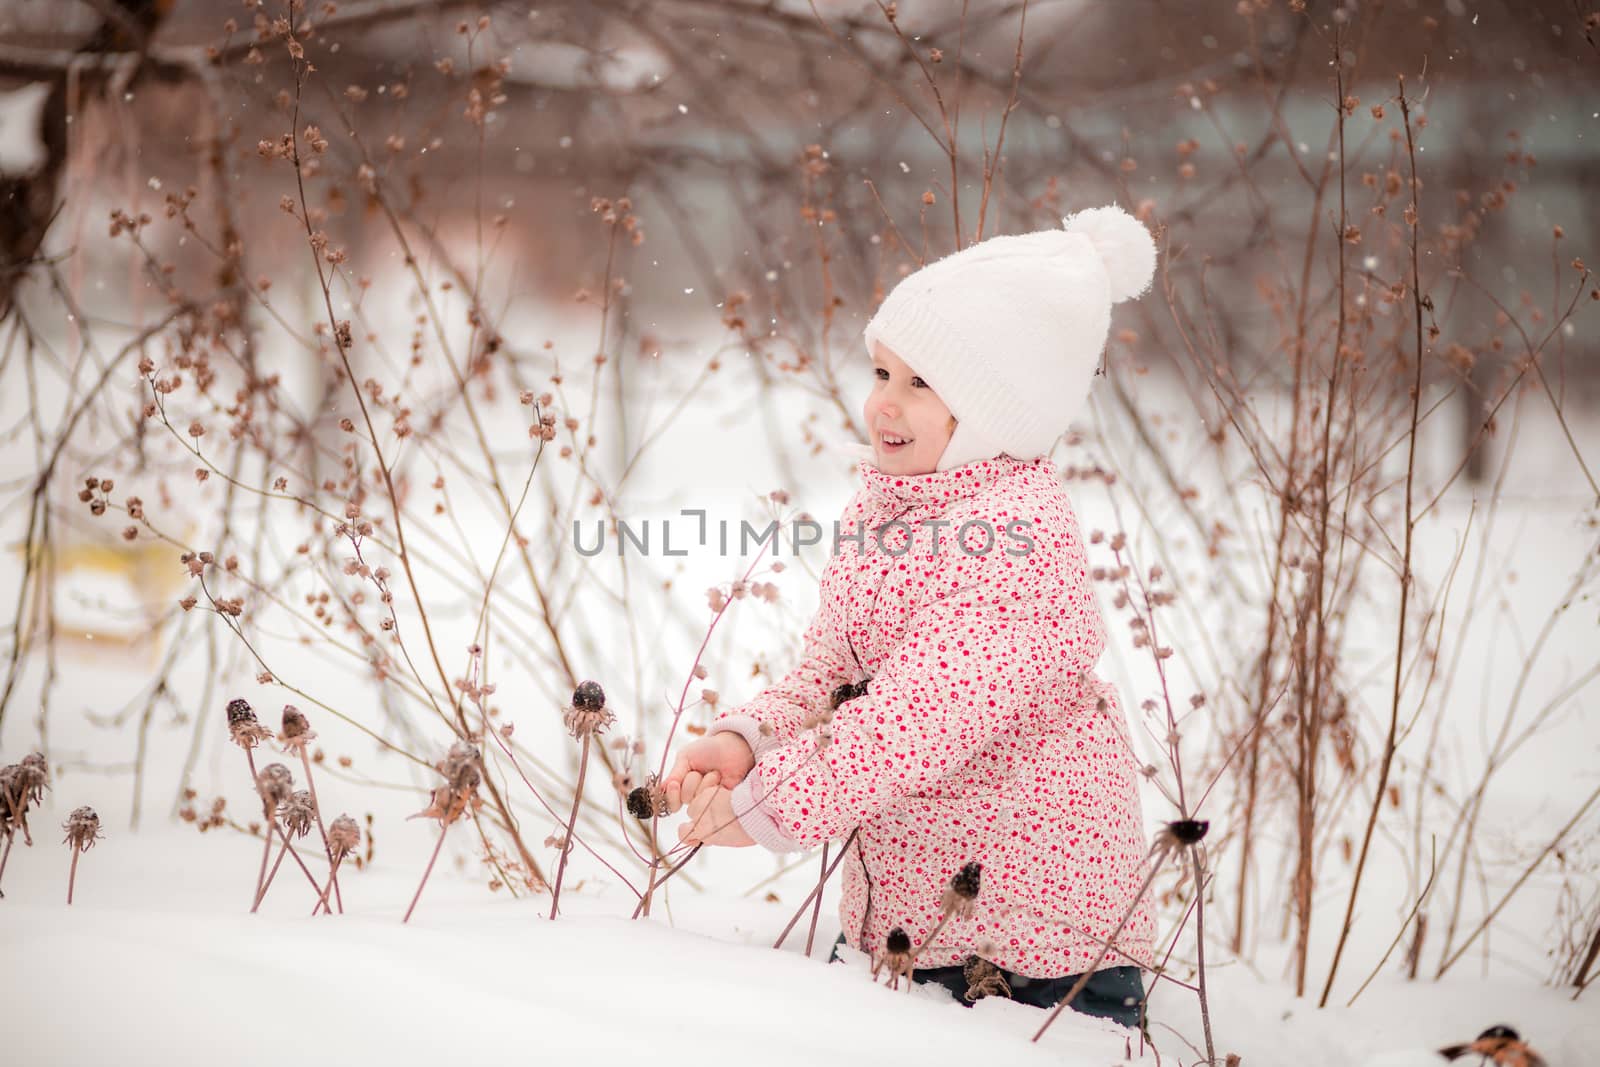 A little girl sits in the snow and picks dried plants on sunny winter day. by galinasharapova